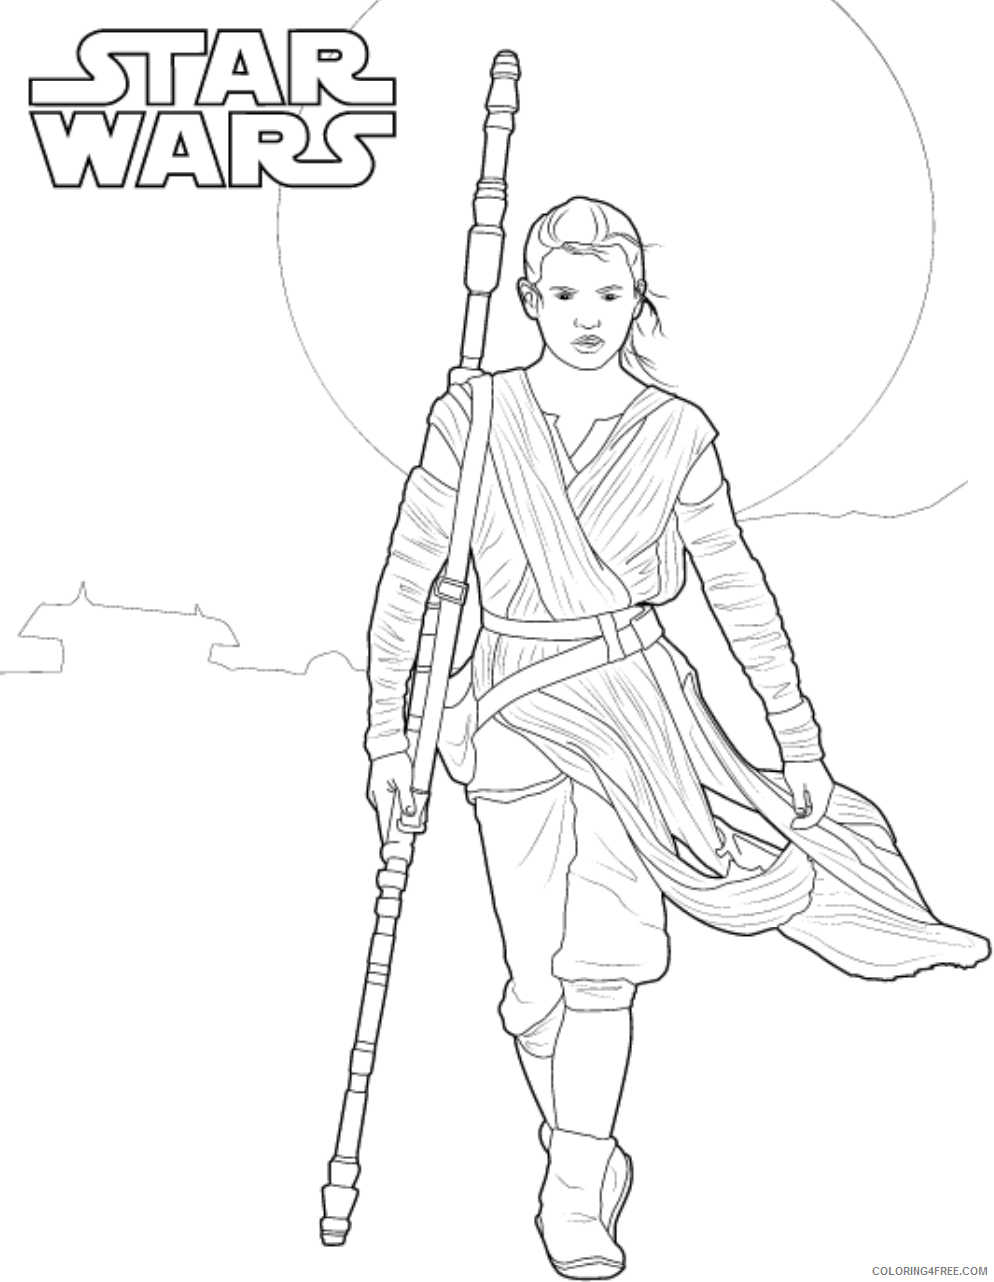 Star Wars Coloring Pages TV Film rey in star wars a4 Printable 2020 07747 Coloring4free